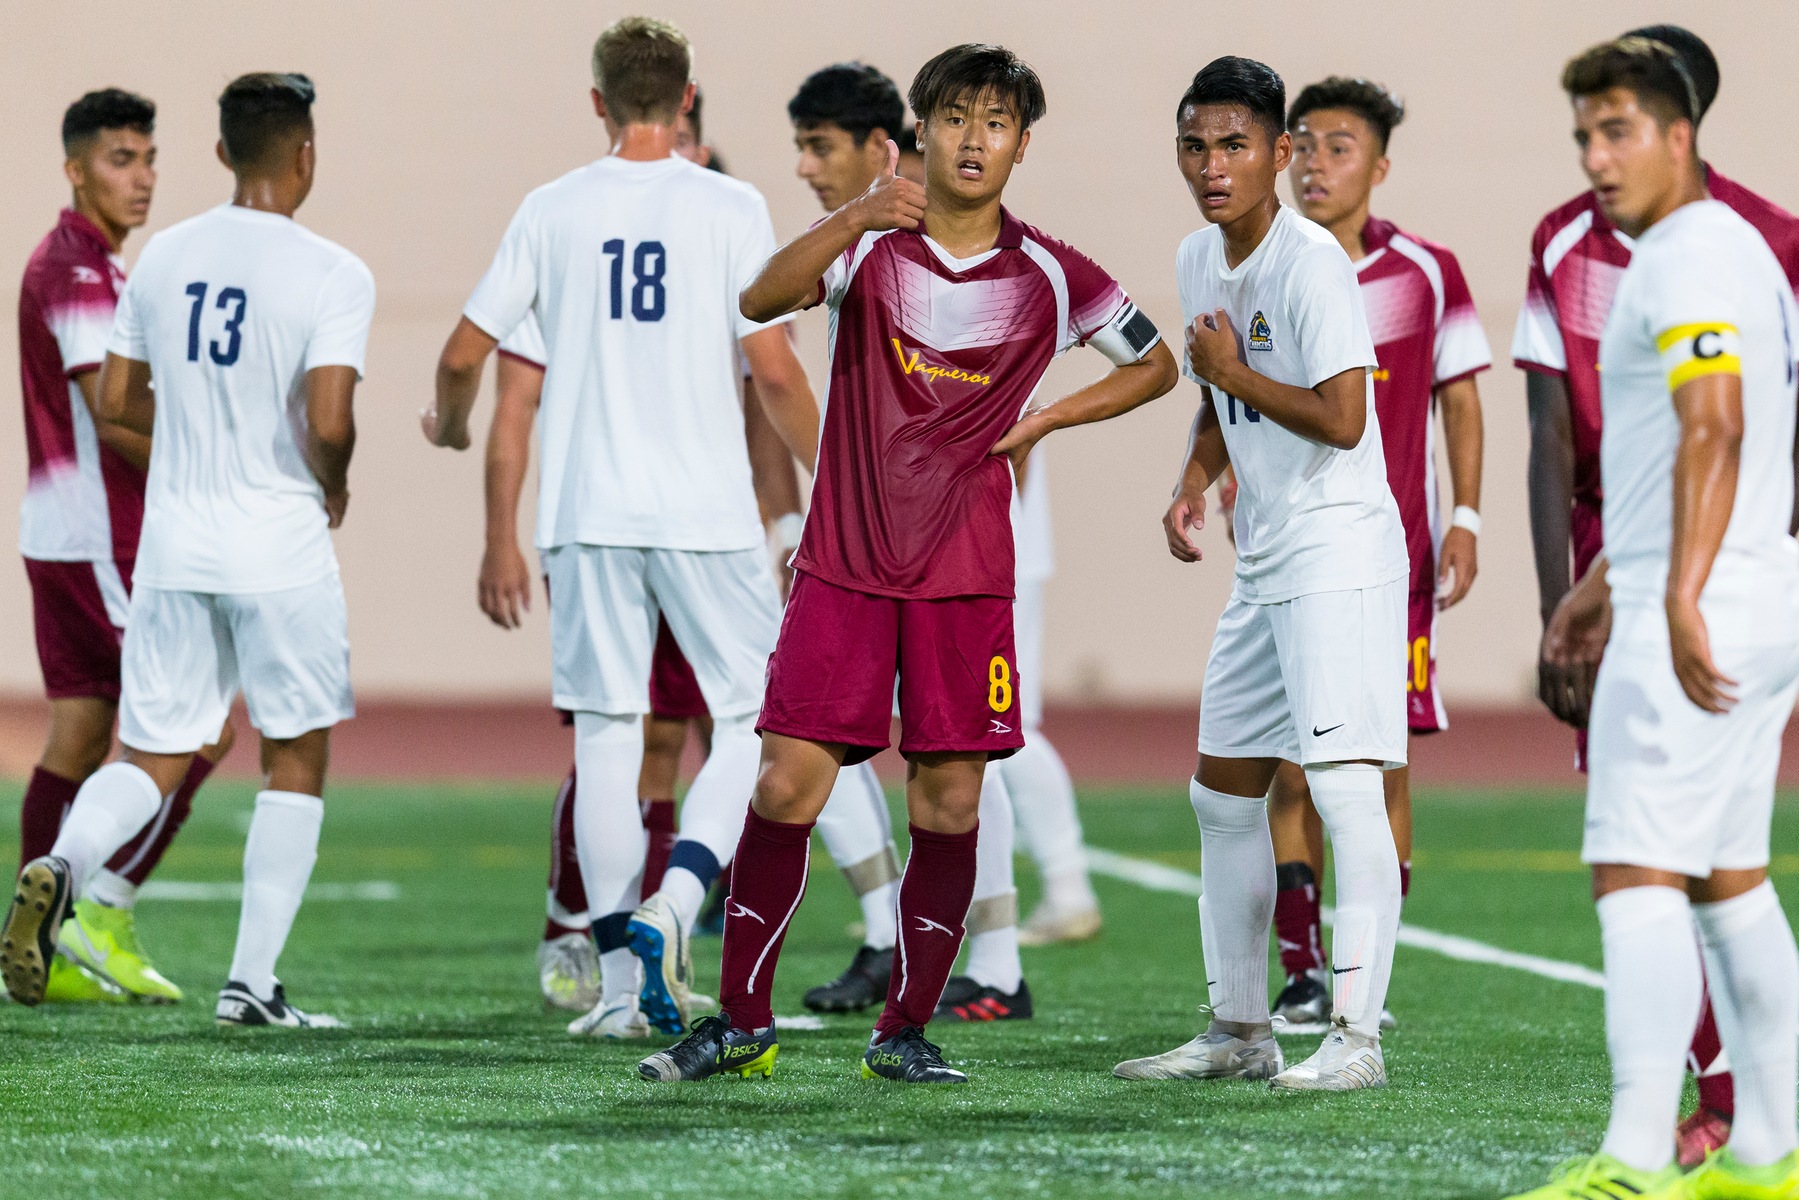 Men's Soccer team falls to 1-2 after 3-0 loss to Cypress